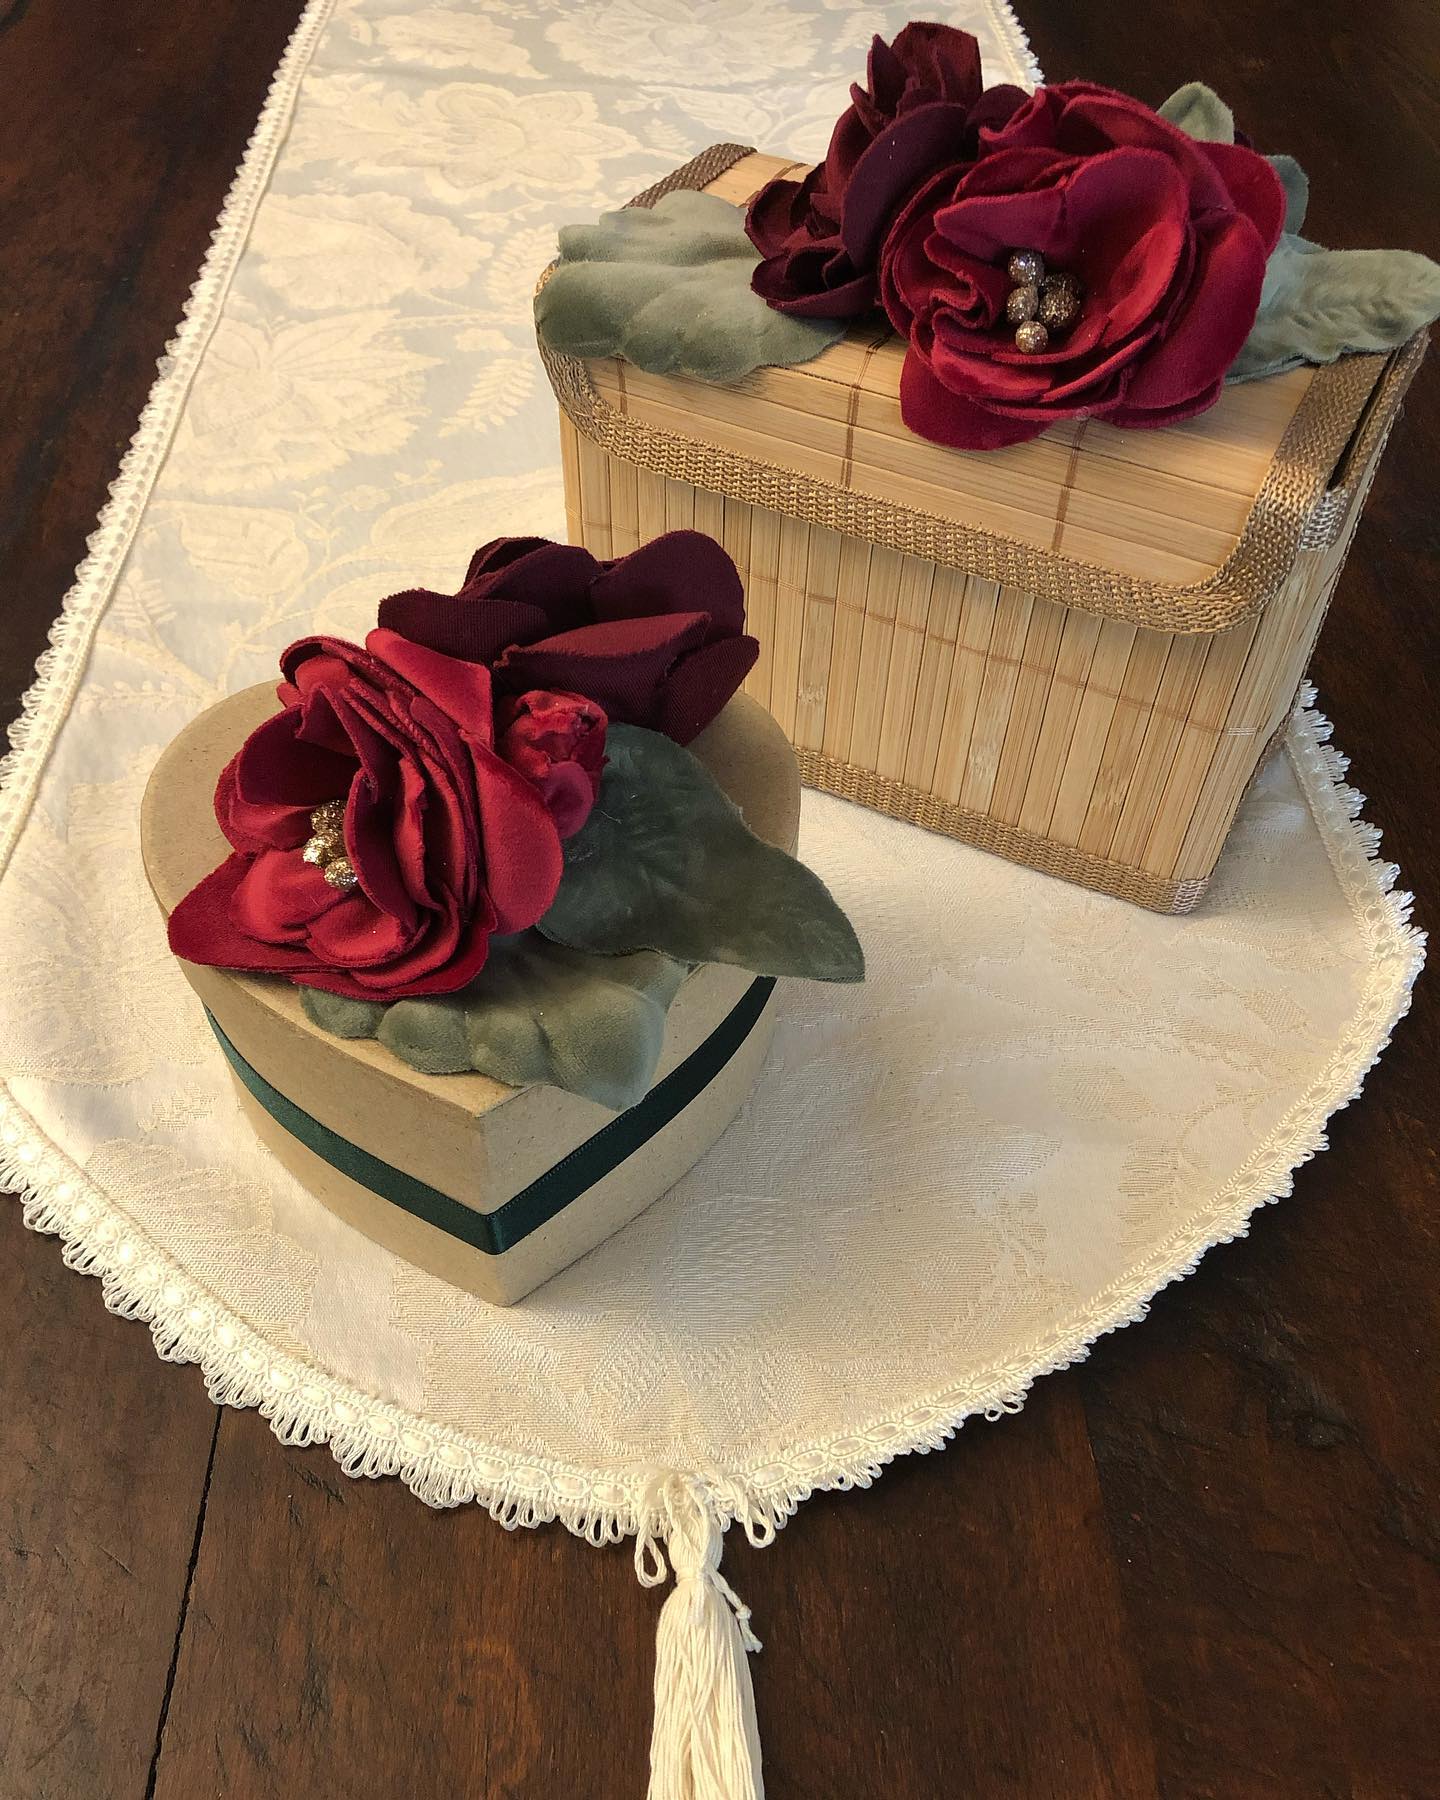 I love DIY! Boxes with velveteen Camellias. An original gift for any occasion.
#diy#creativity#createwithflowers
#velvet